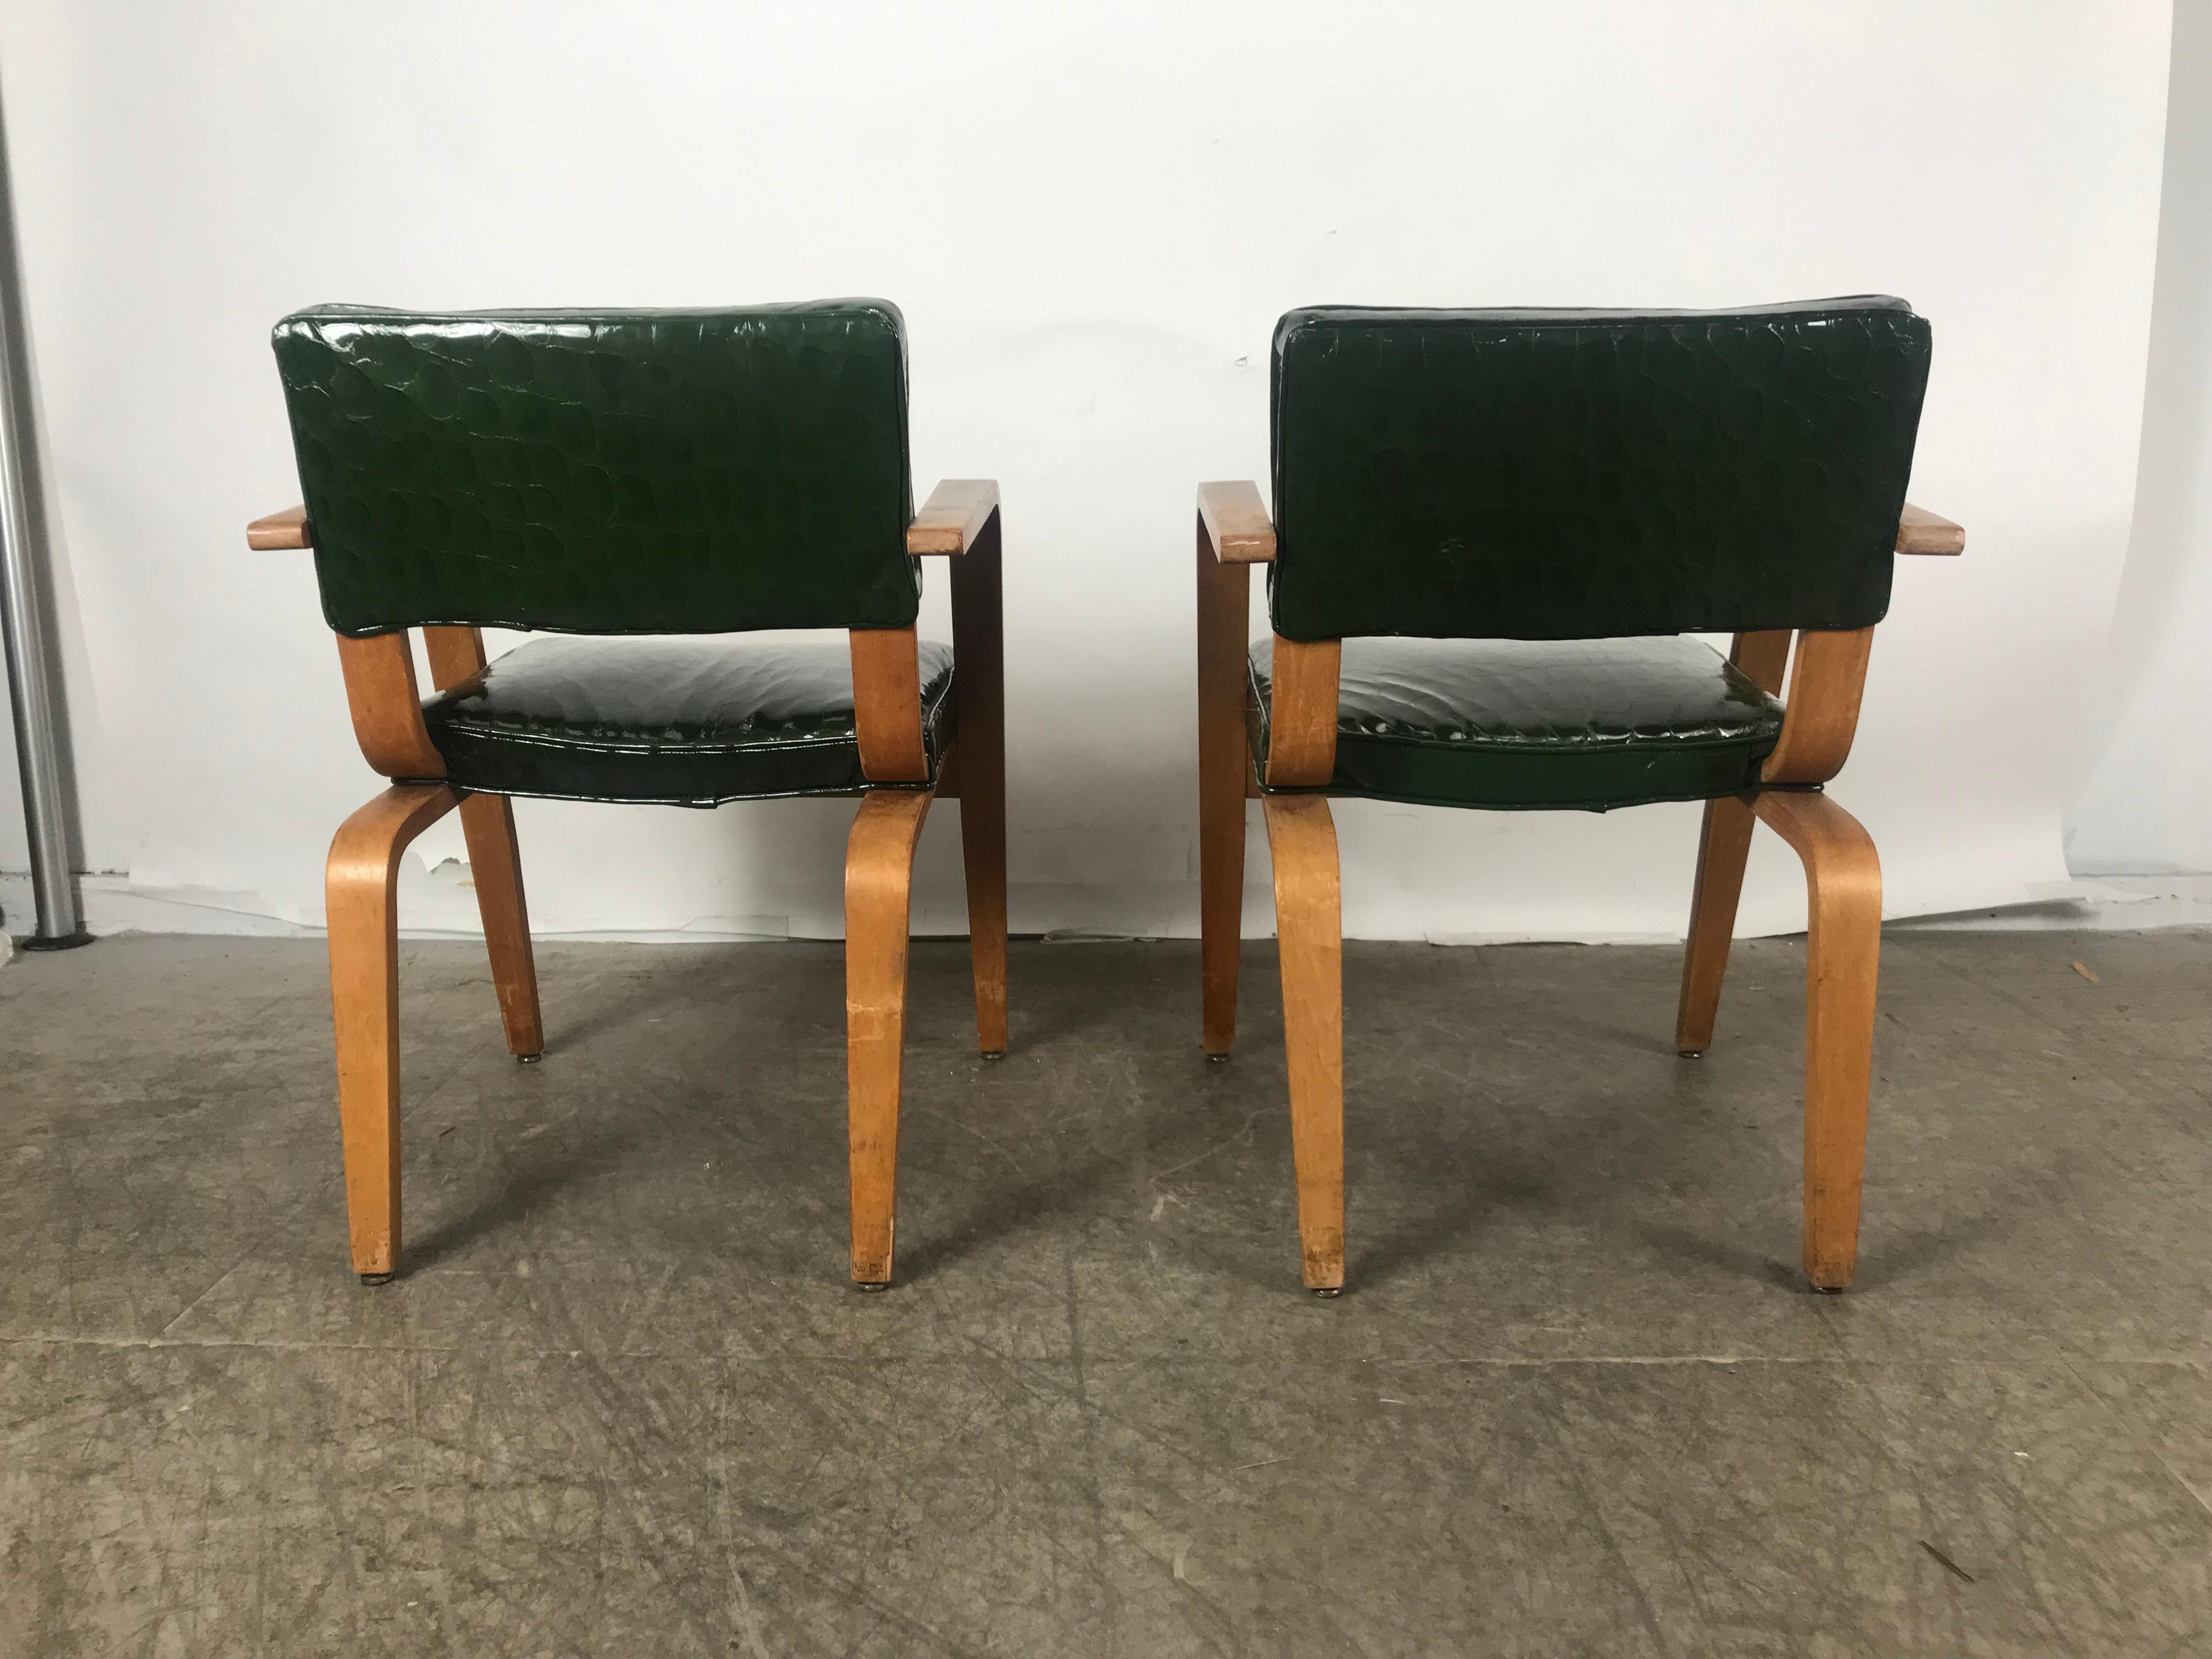 Mid-20th Century Pair of Modernist Thonet Bent Wood and Alligator Patent Leather Lounge Chairs